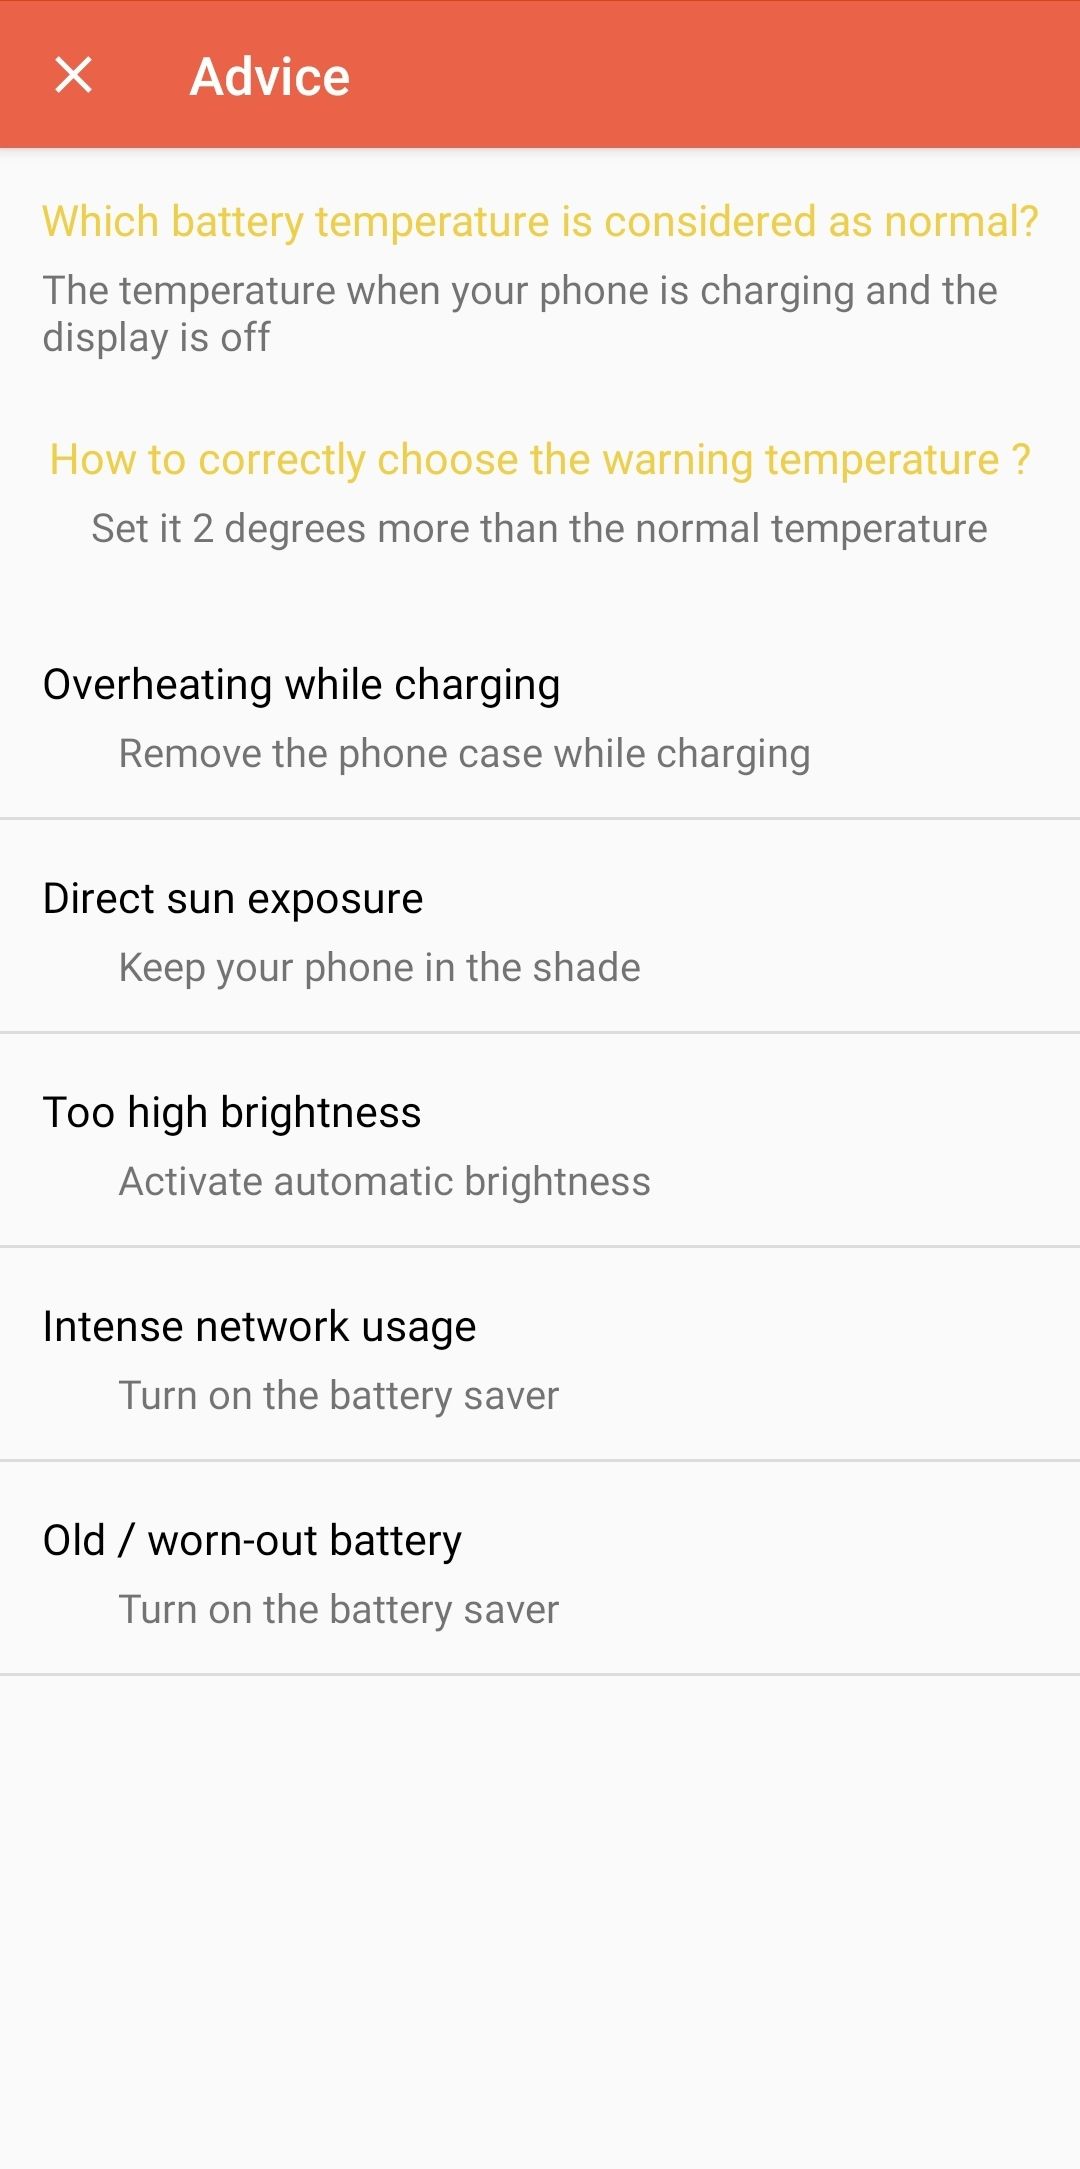 The Battery Temperature app includes advice on protecting your phone from heat damage